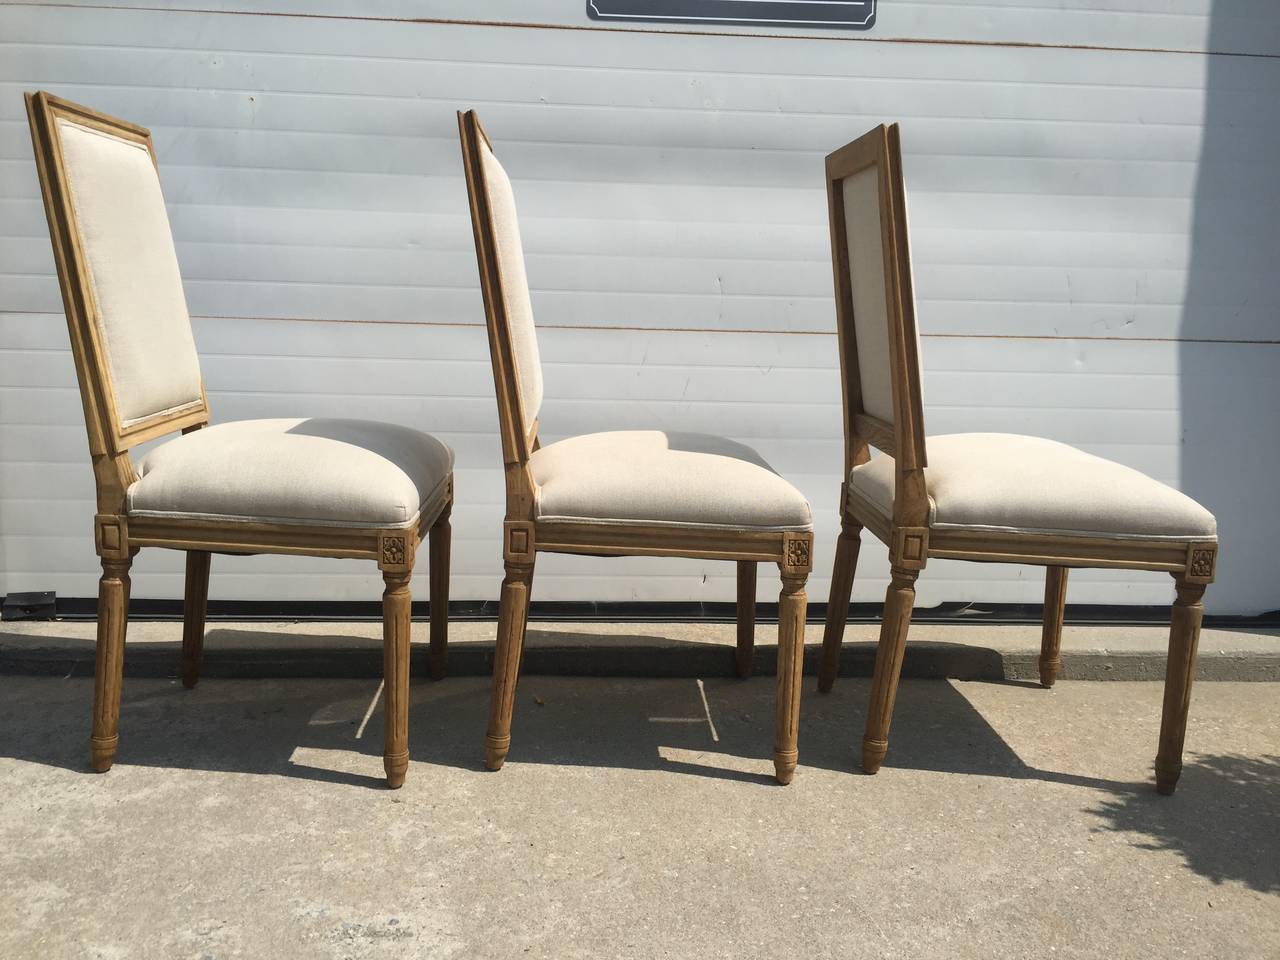 New square back French chairs in Belgian Linen.  Wood is finished with a Belgian oak finish.  Available in ANY quantity.  May need to be ordered if not in stock.  Please call showroom! We have a set of 6 at the moment